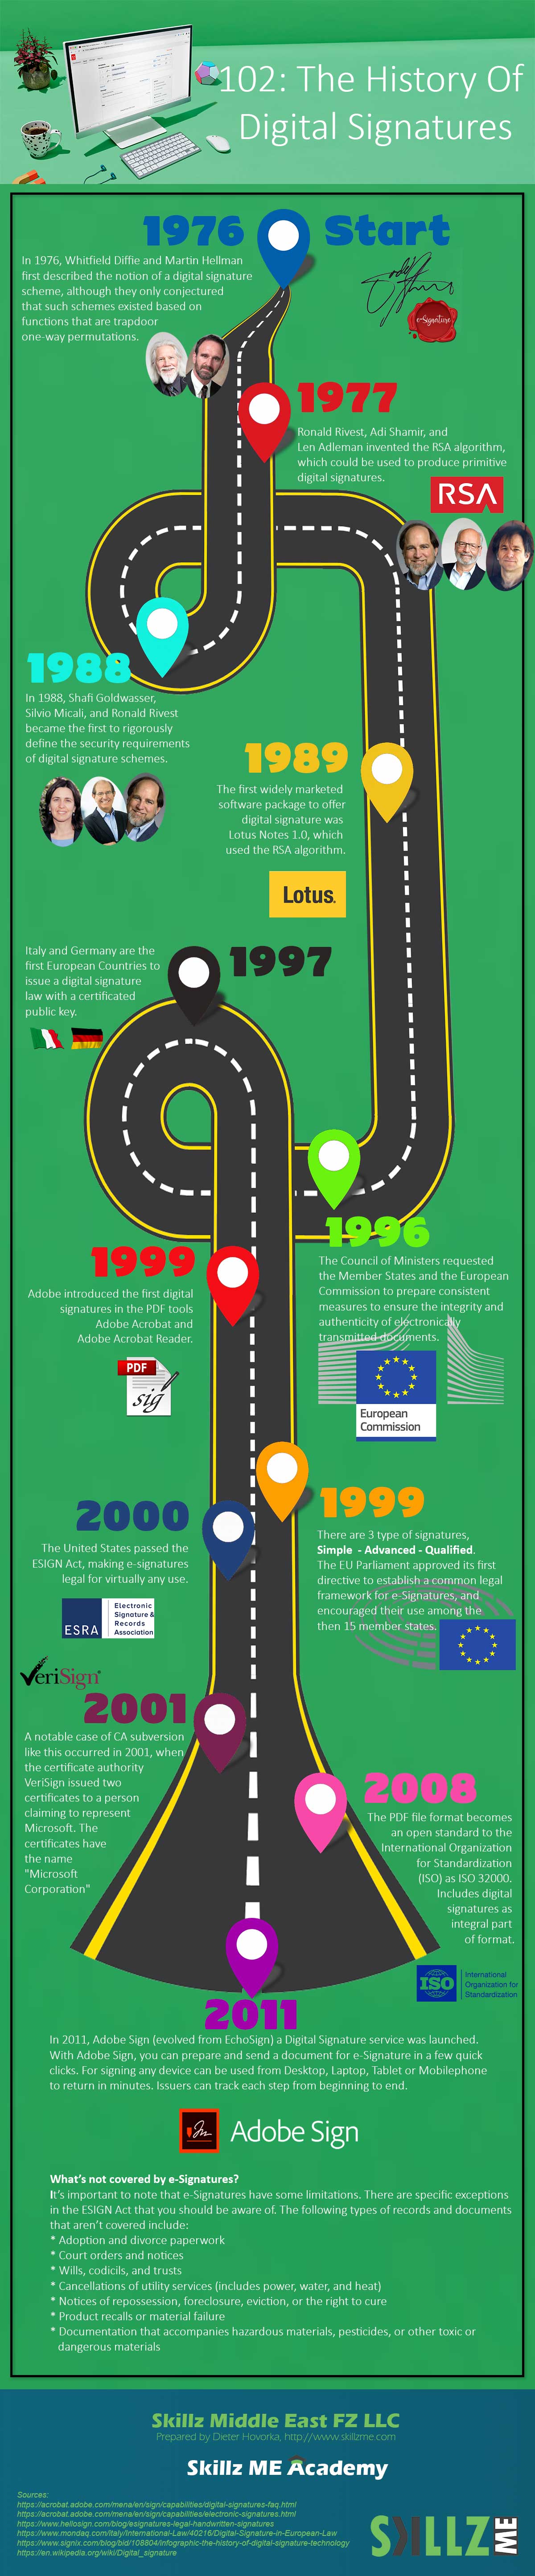 The History of Digital Signatures Infographic